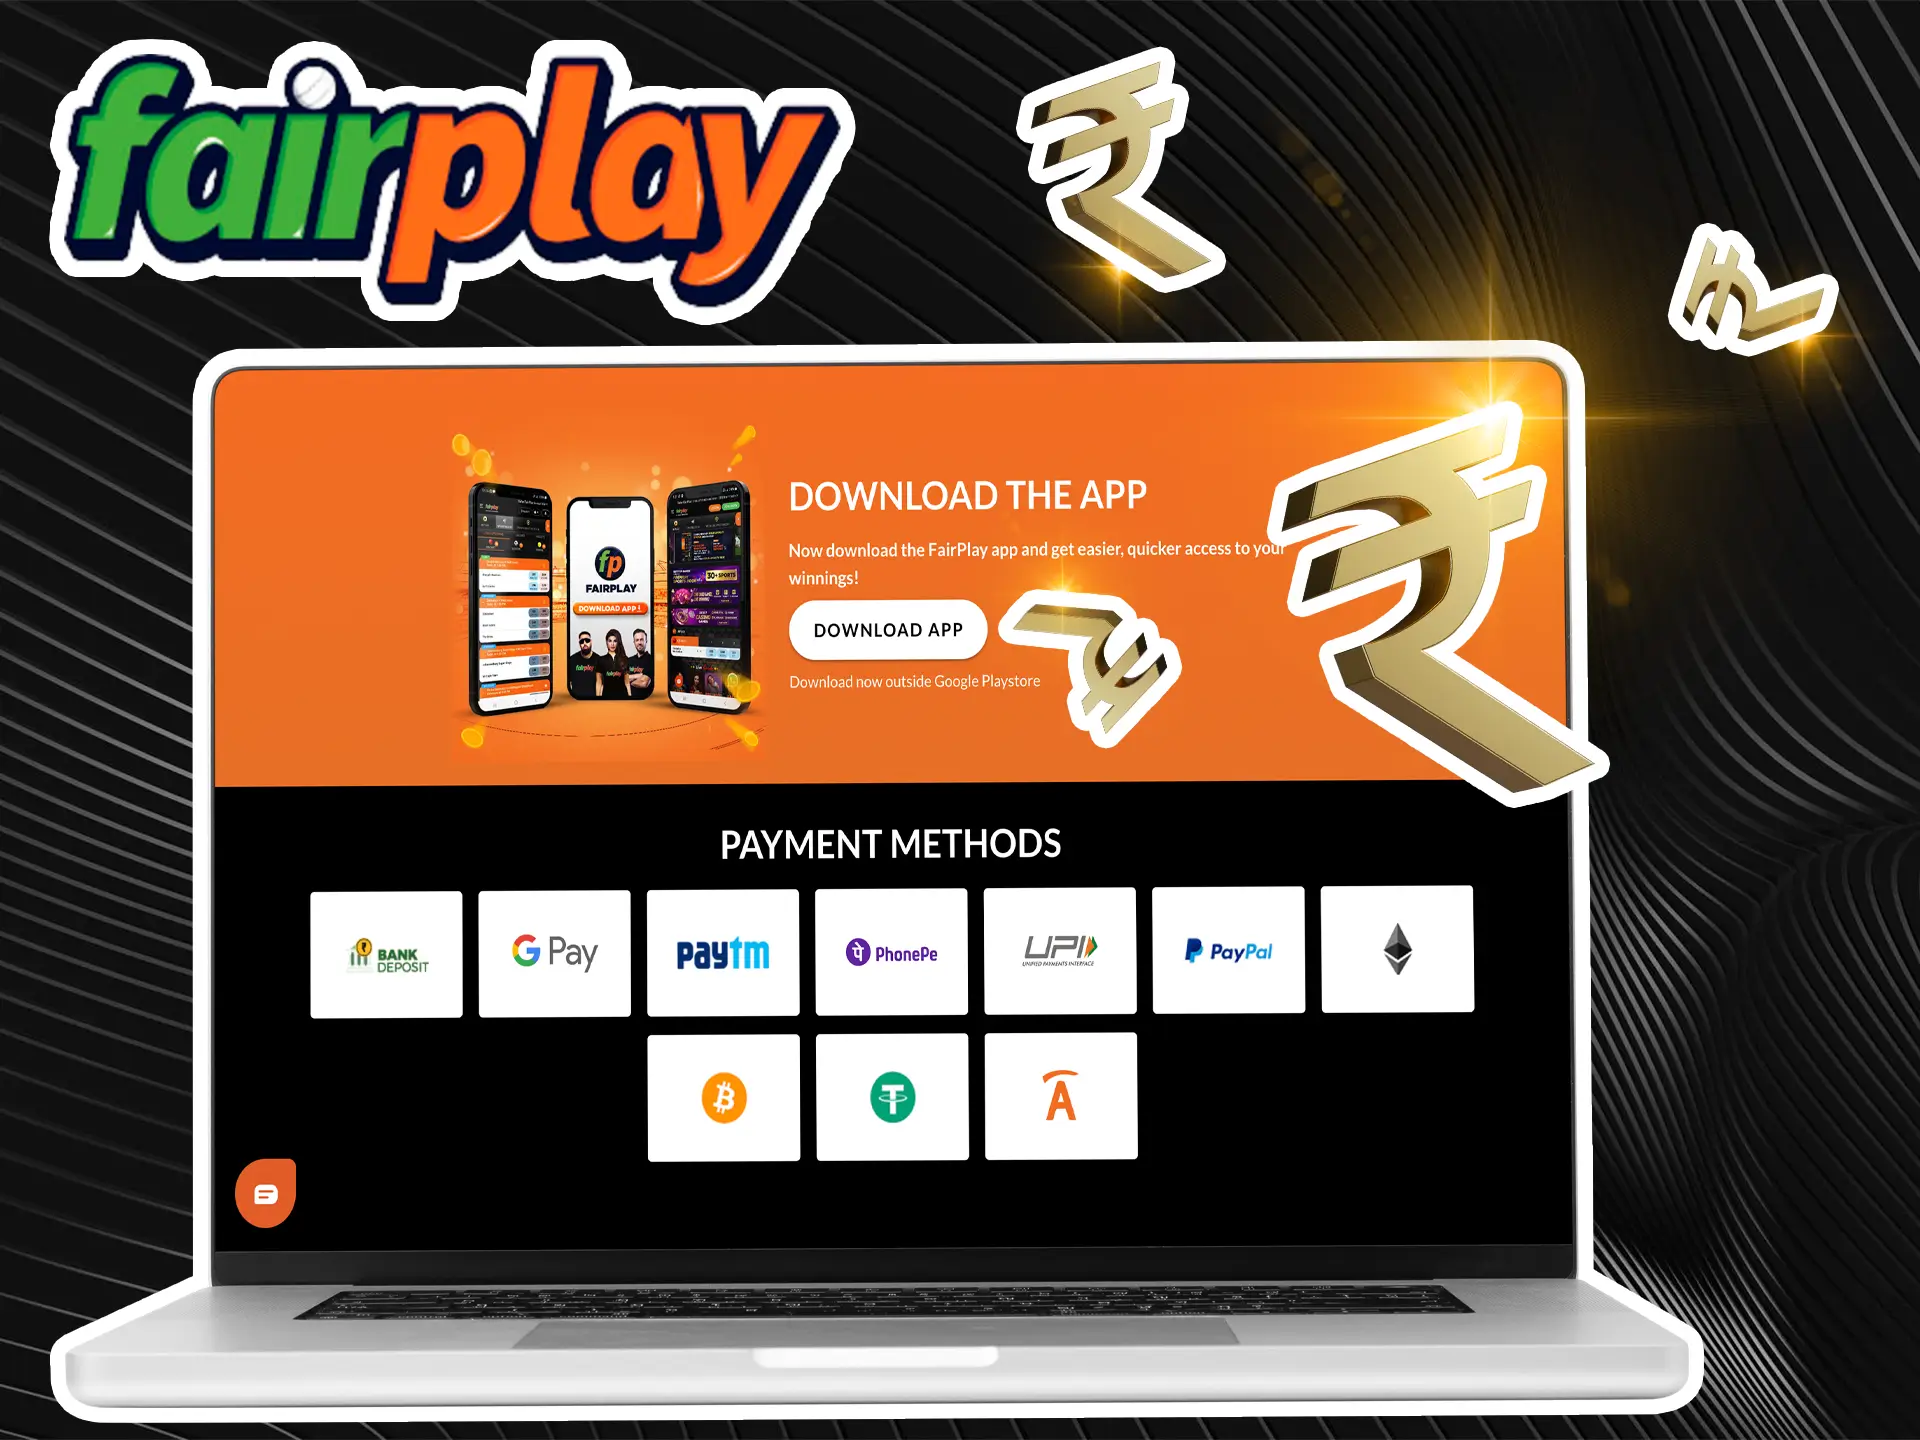 Use a withdrawal and deposit method that is convenient for you at Fairplay Casino.